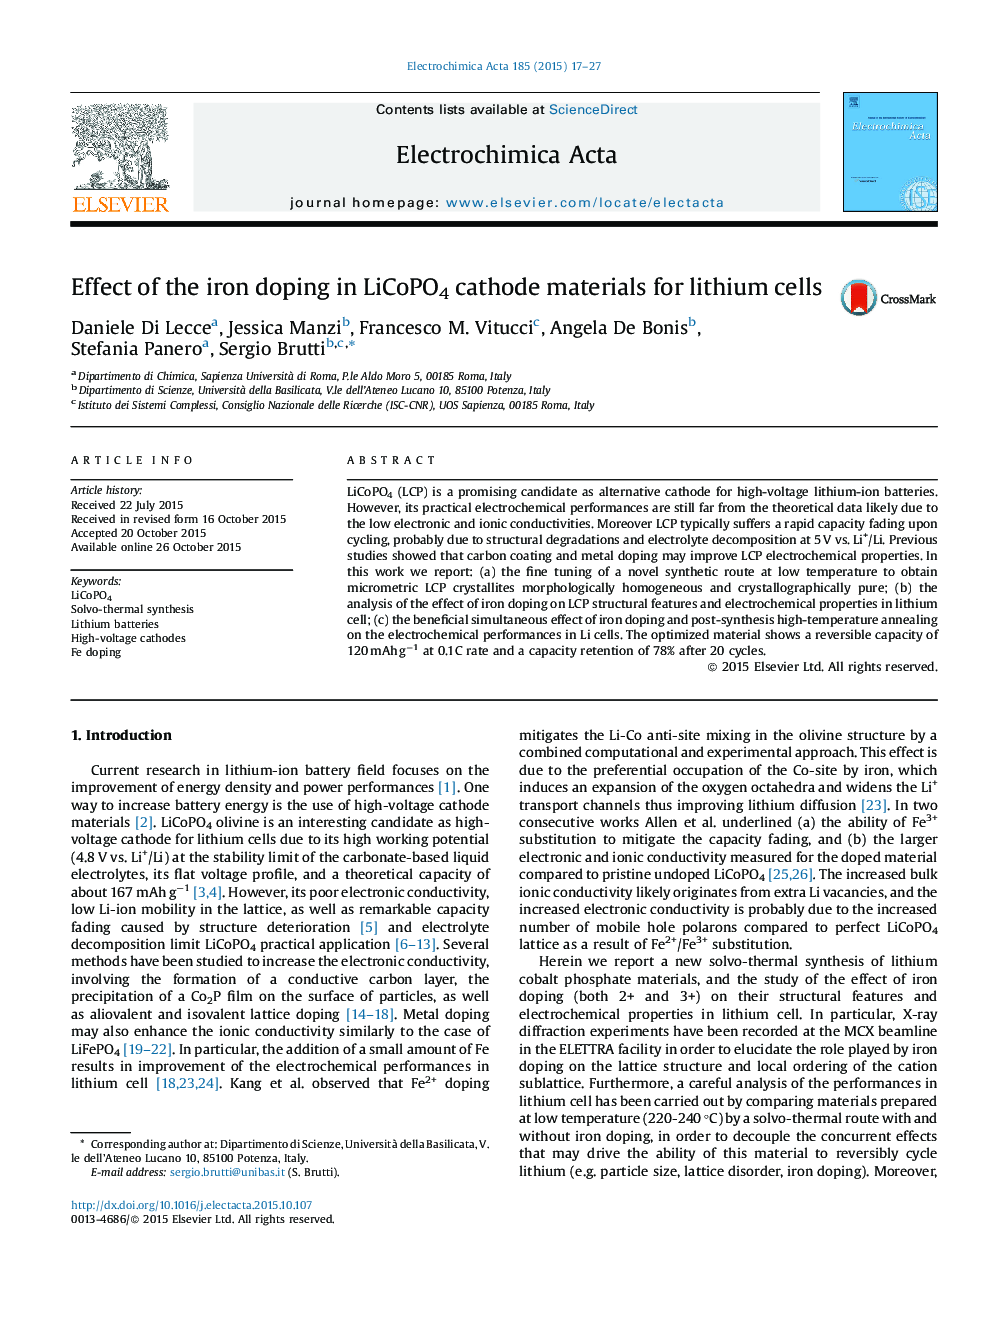 Effect of the iron doping in LiCoPO4 cathode materials for lithium cells